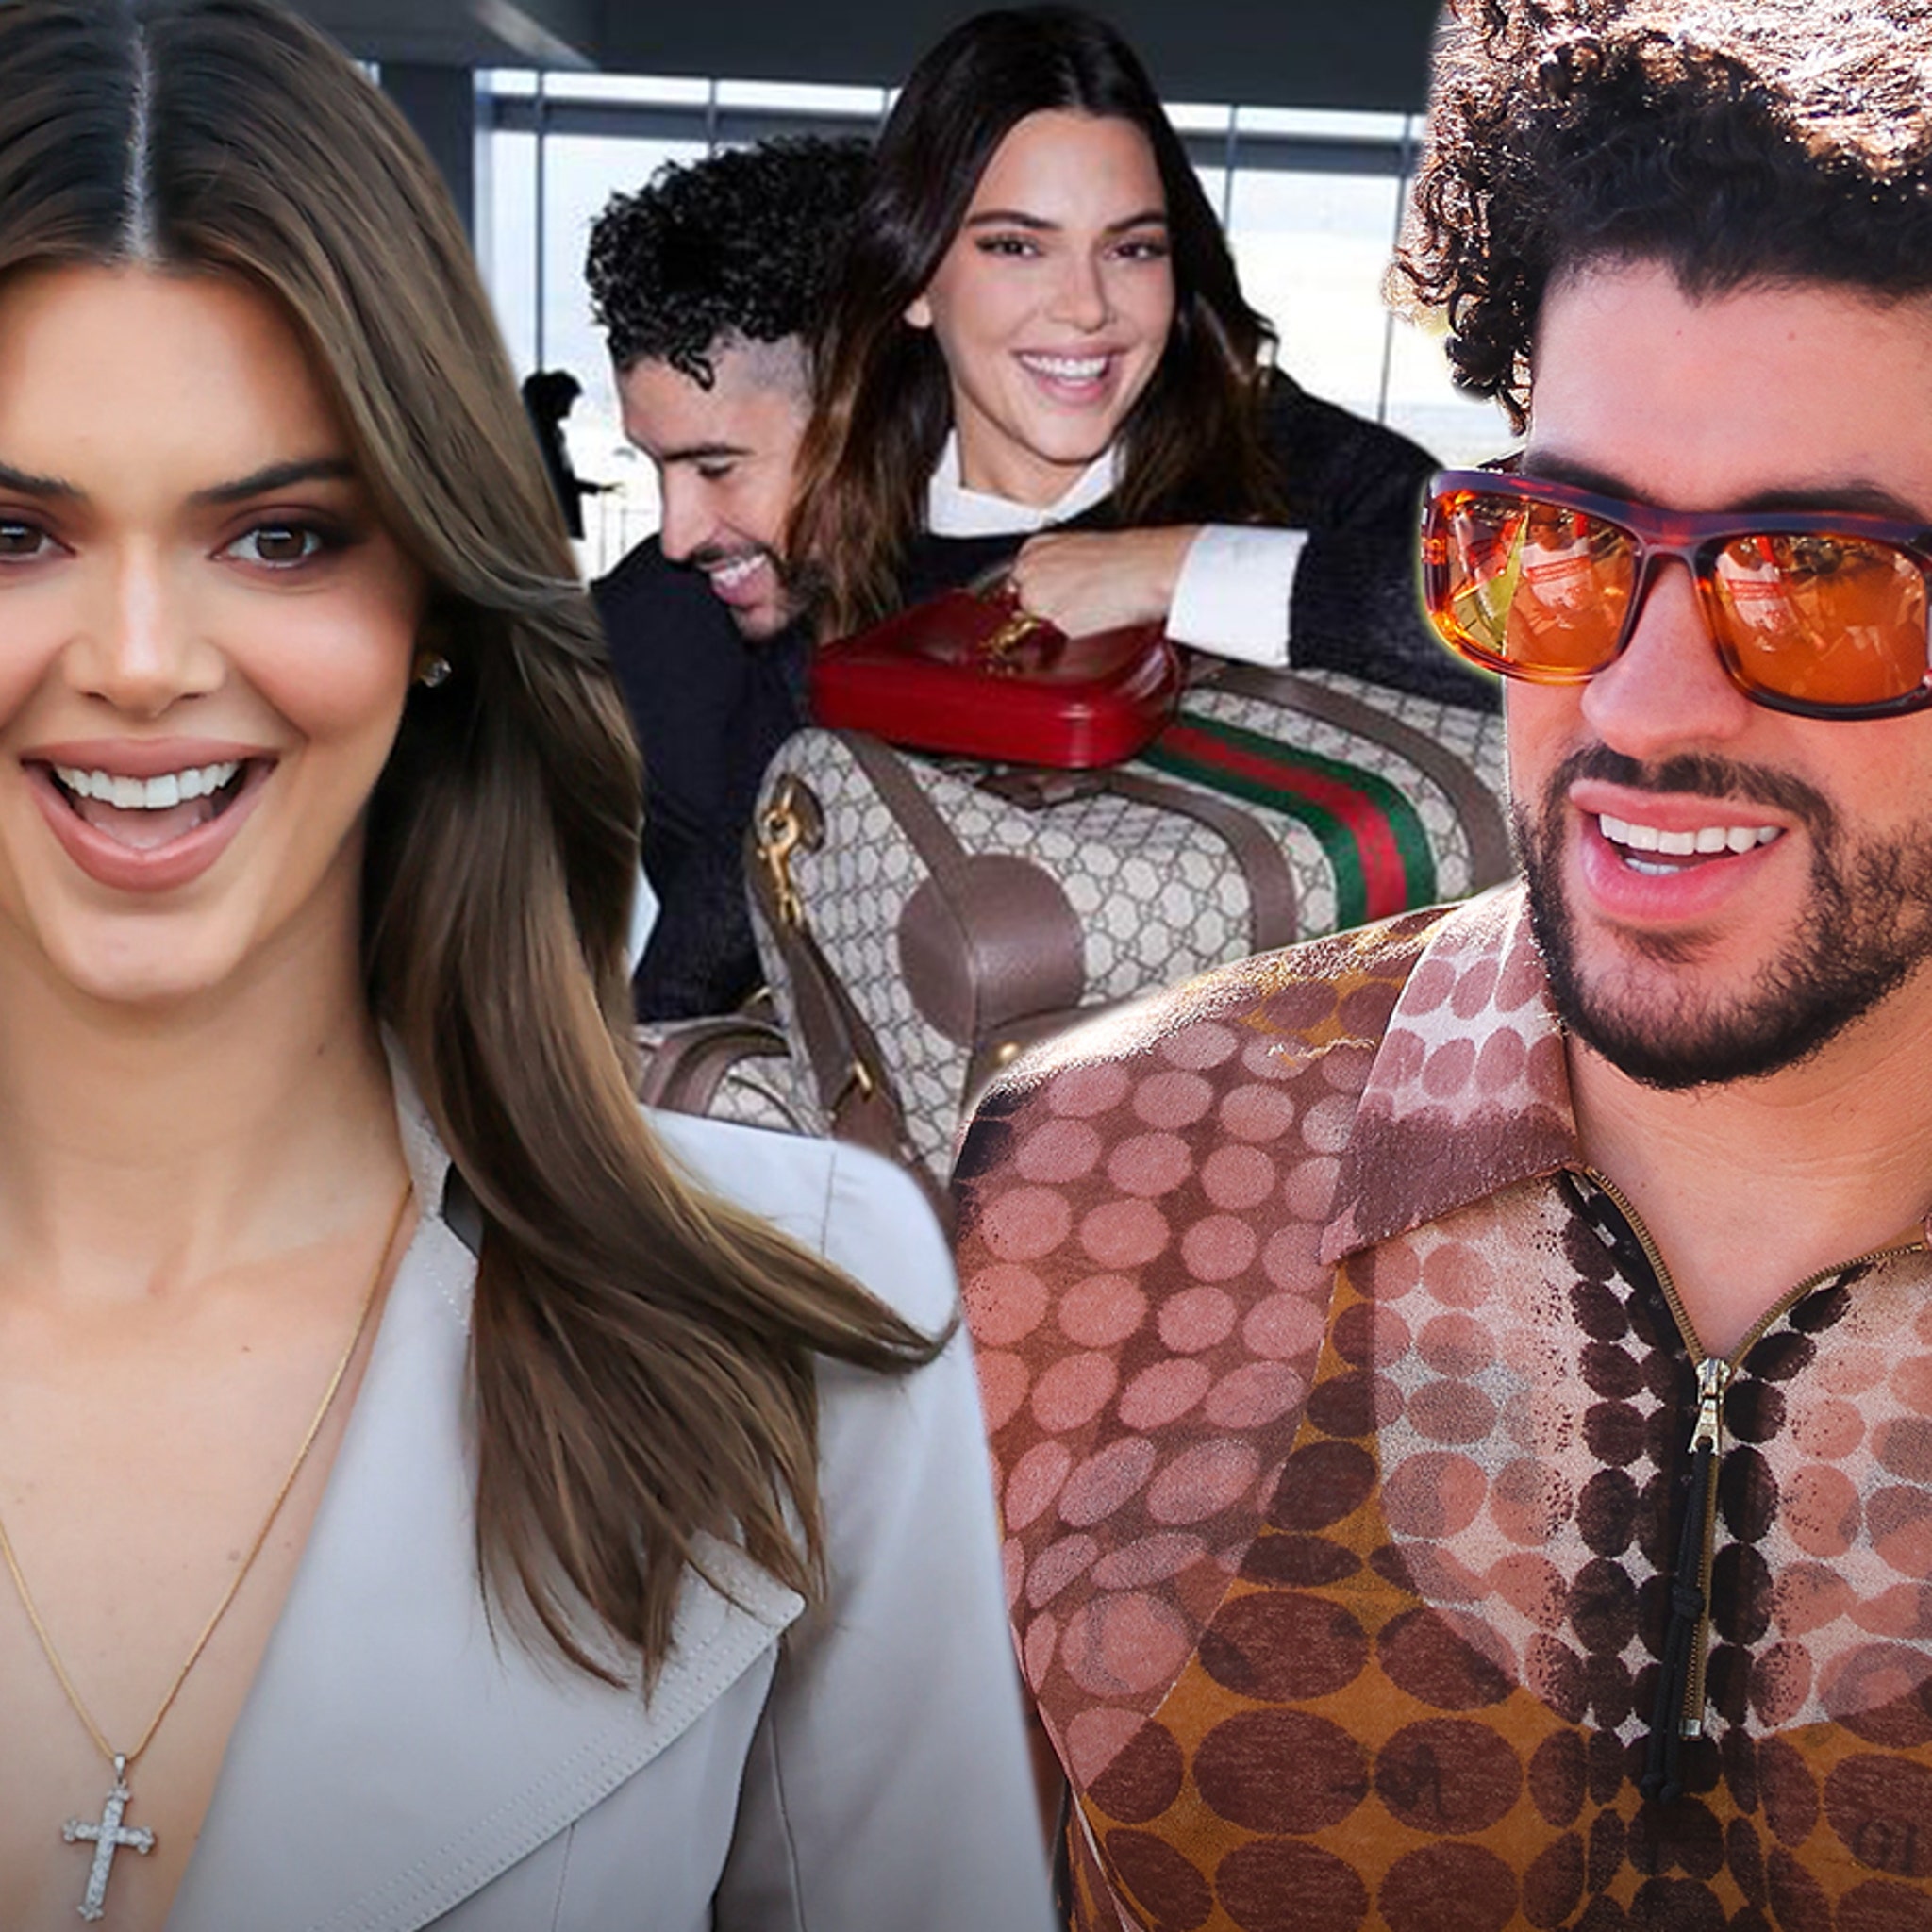 Kendall Jenner and Bad Bunny Make It Official in Gucci Ad Campaign